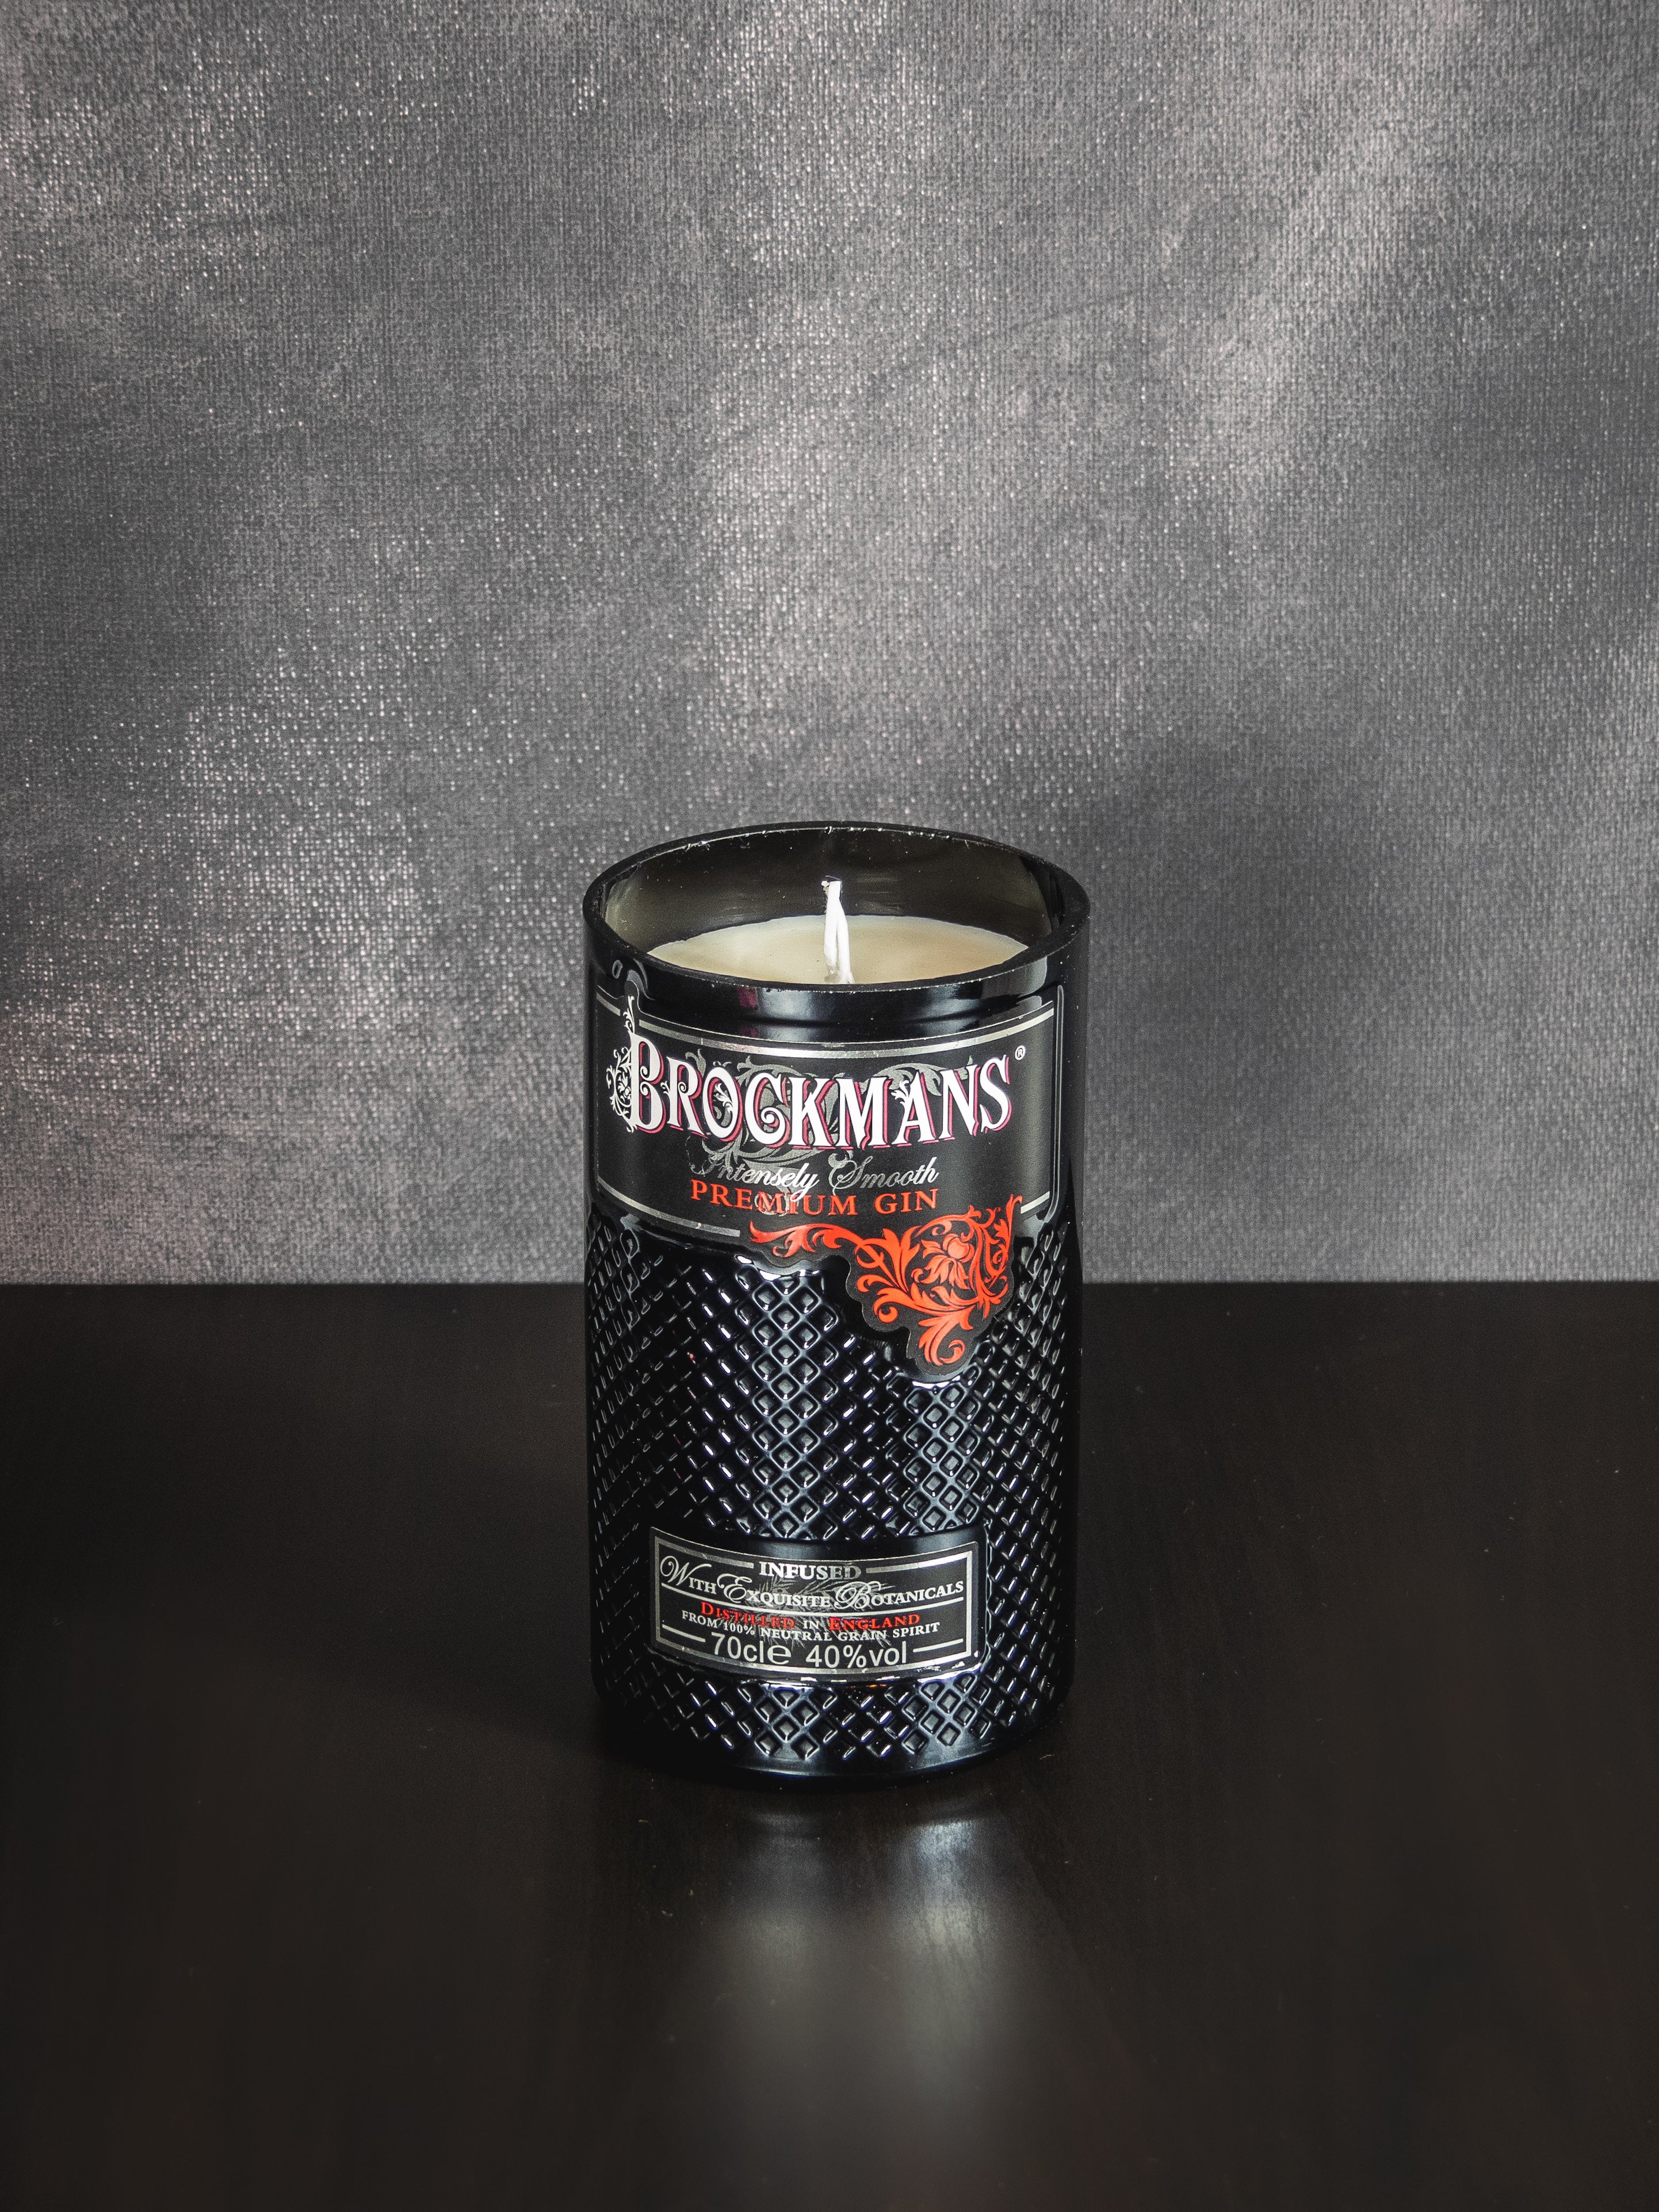 Brockmans Gin Candle - Blackberry & Bay Scent